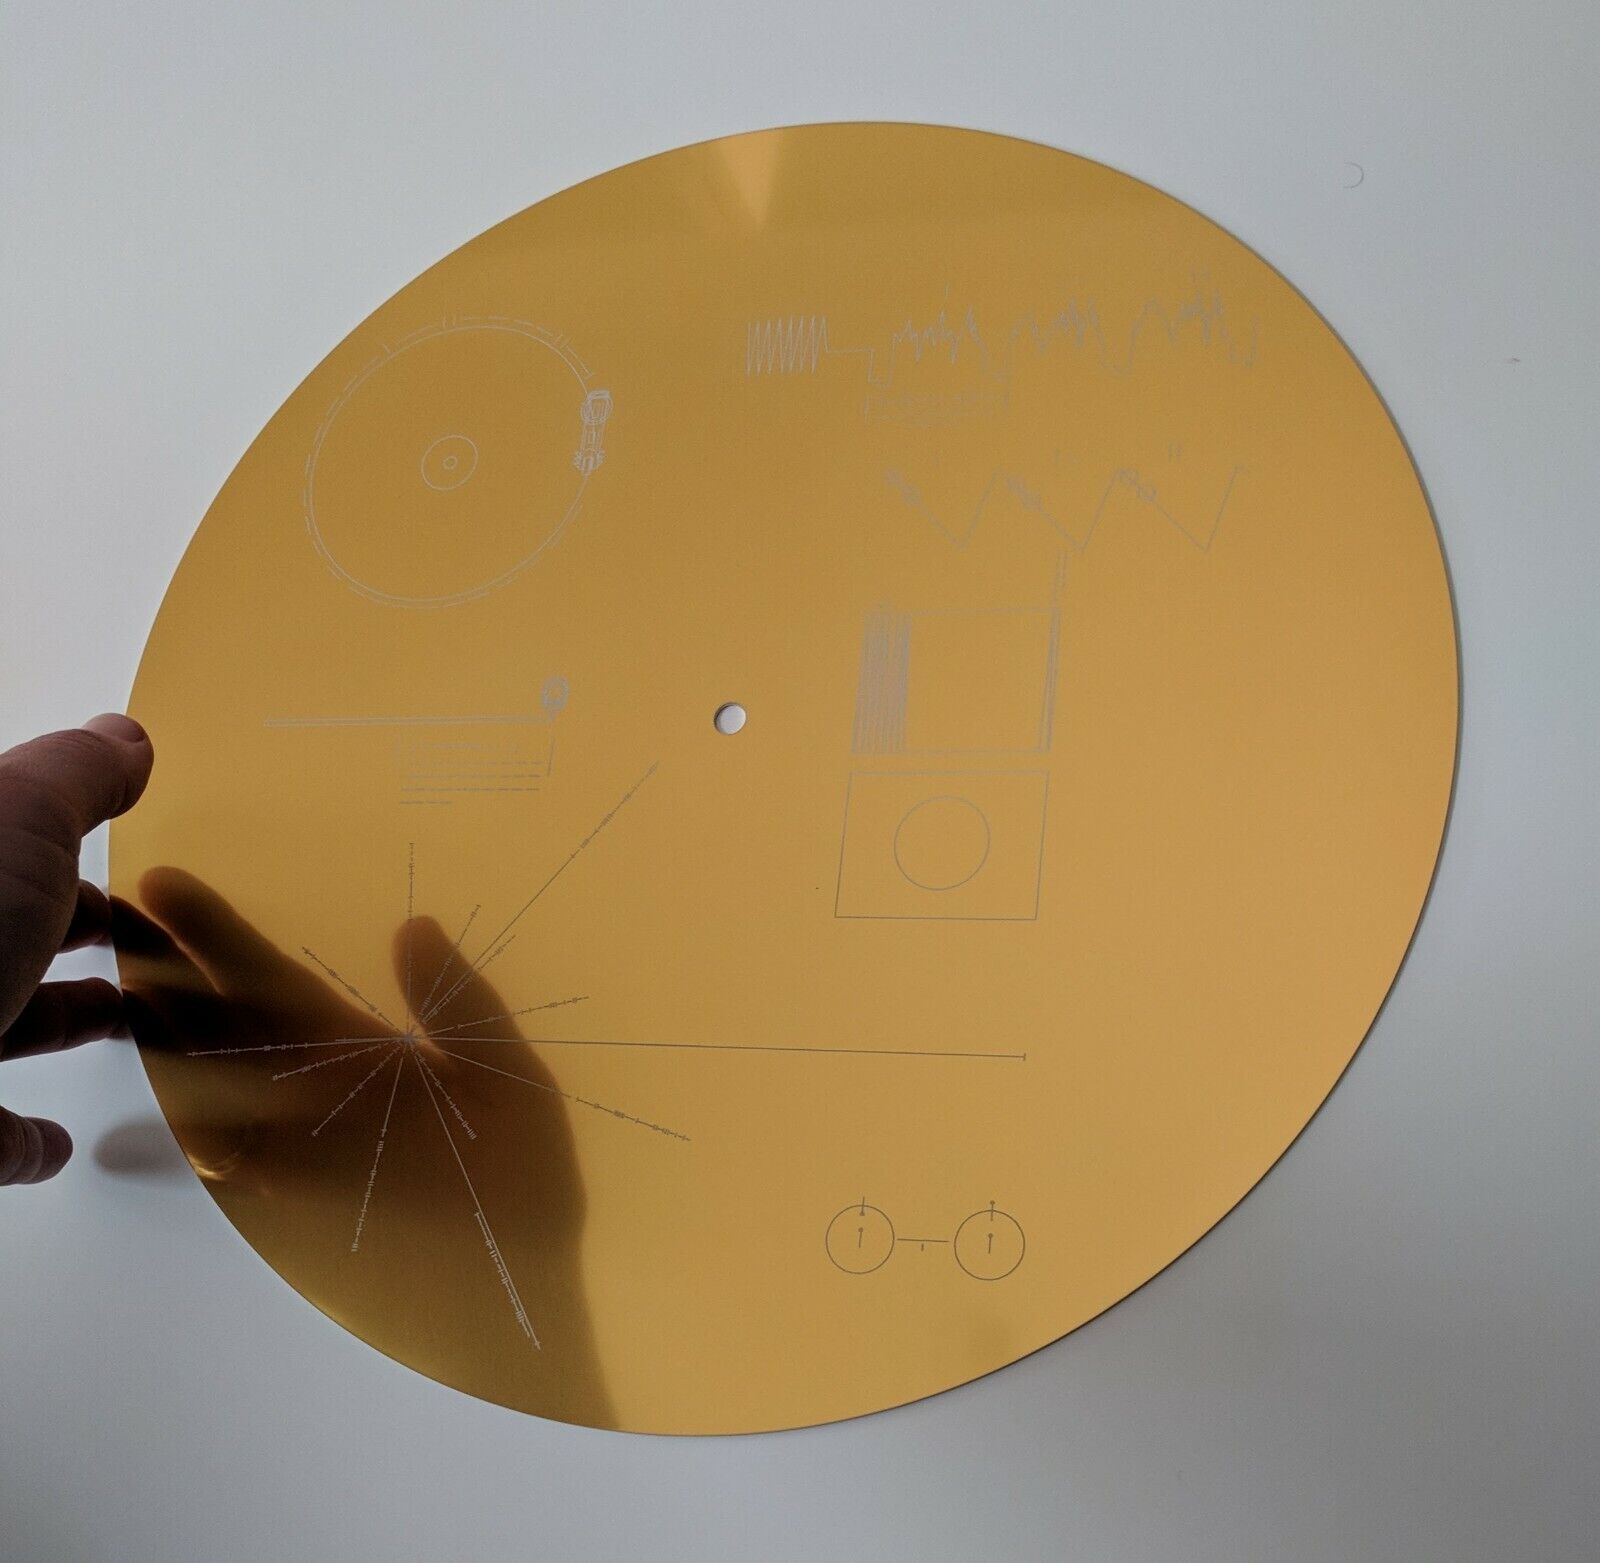 Voyager Golden Record - full size metal replica